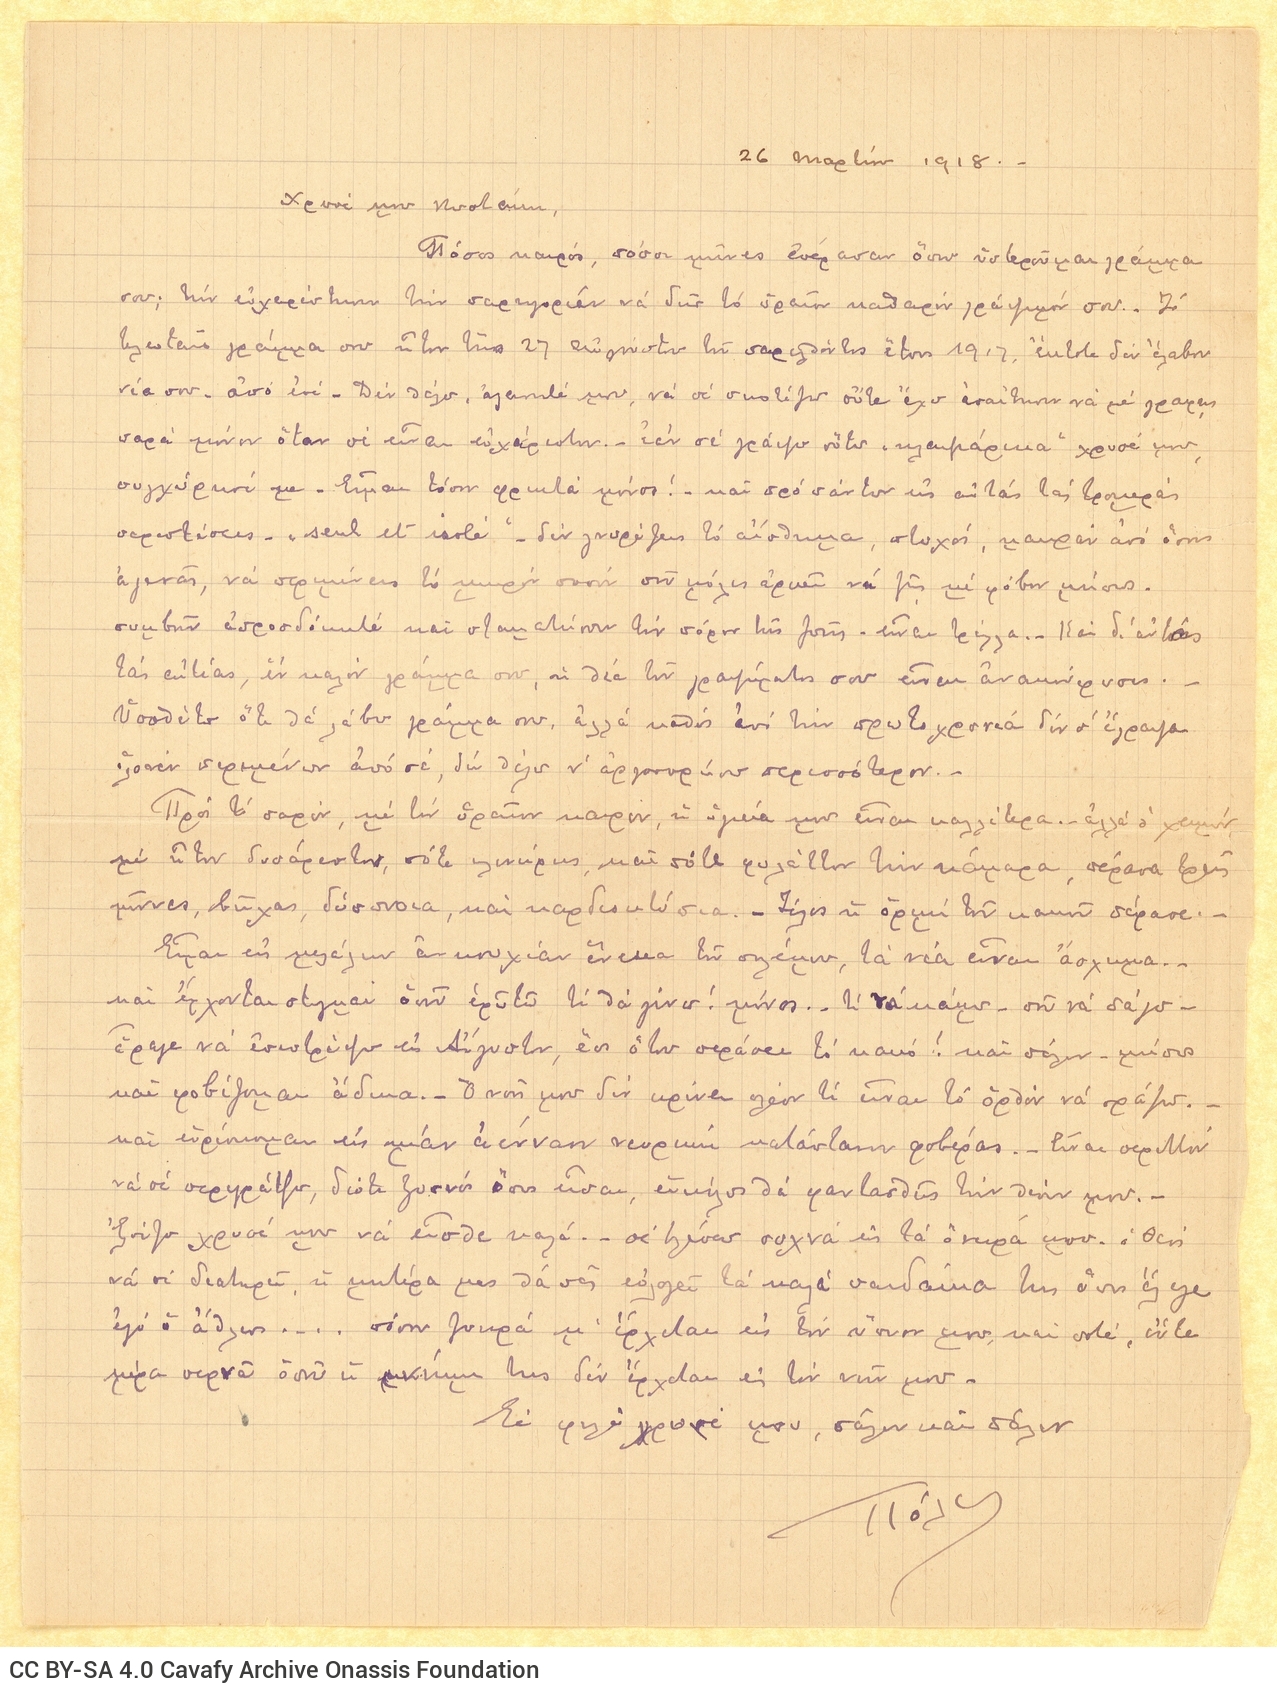 Handwritten letter by Paul Cavafy to C. P. Cavafy. He expresses his concern for the interruption in the correspondence betwee